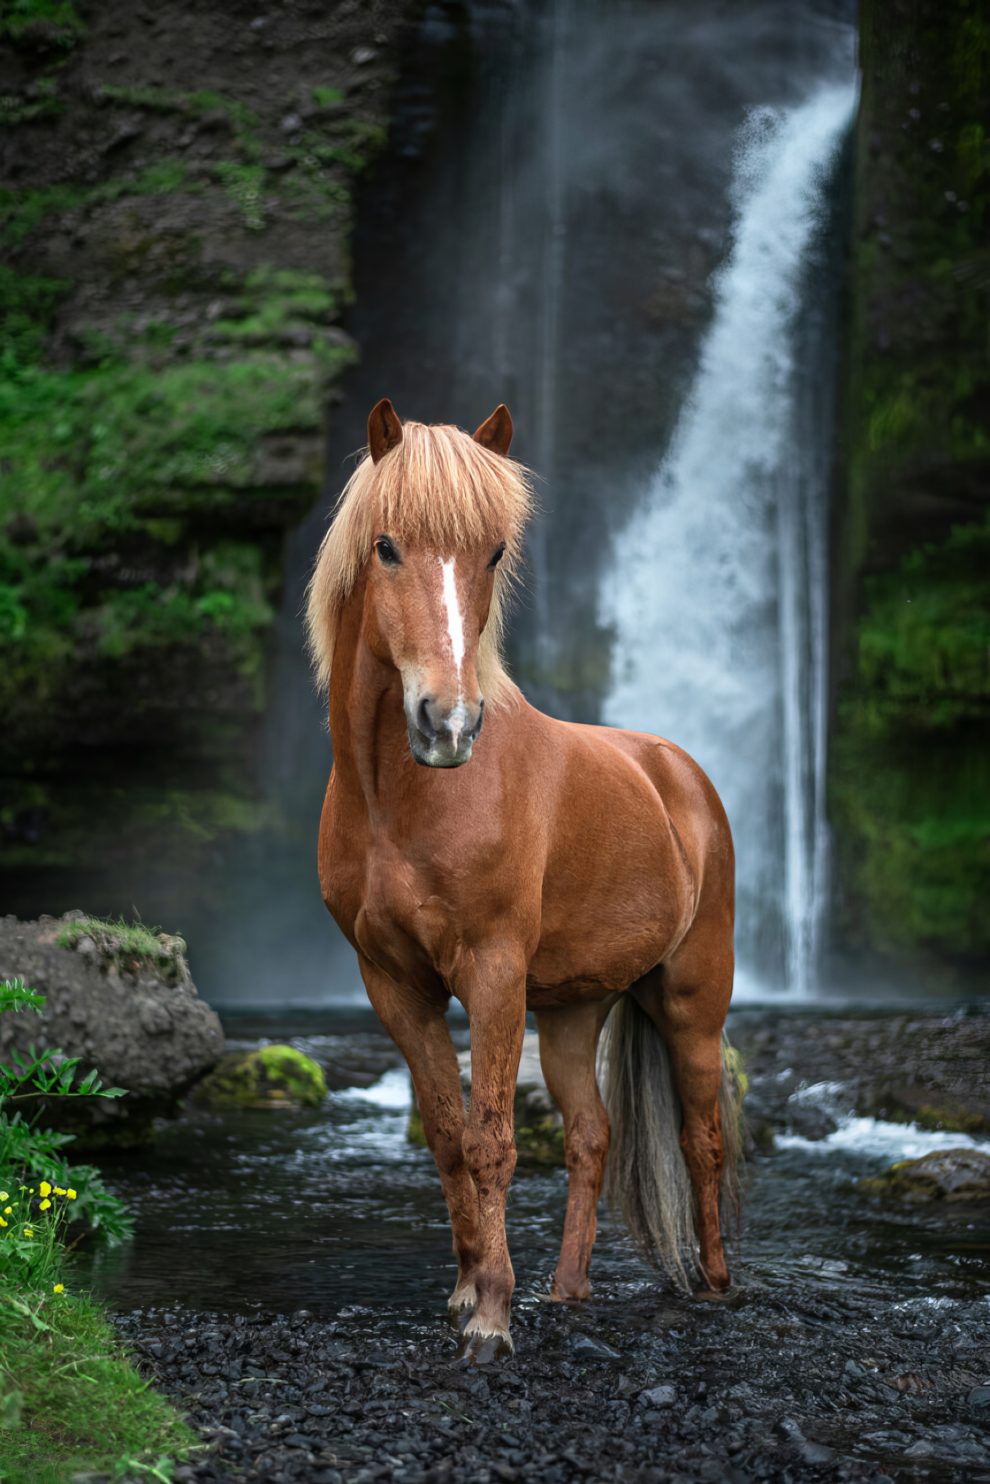 36-stunning-photographs-of-horses-in-Iceland-that-look-like-straight-out-of-a-fairytale-63202ad2e7508__880-